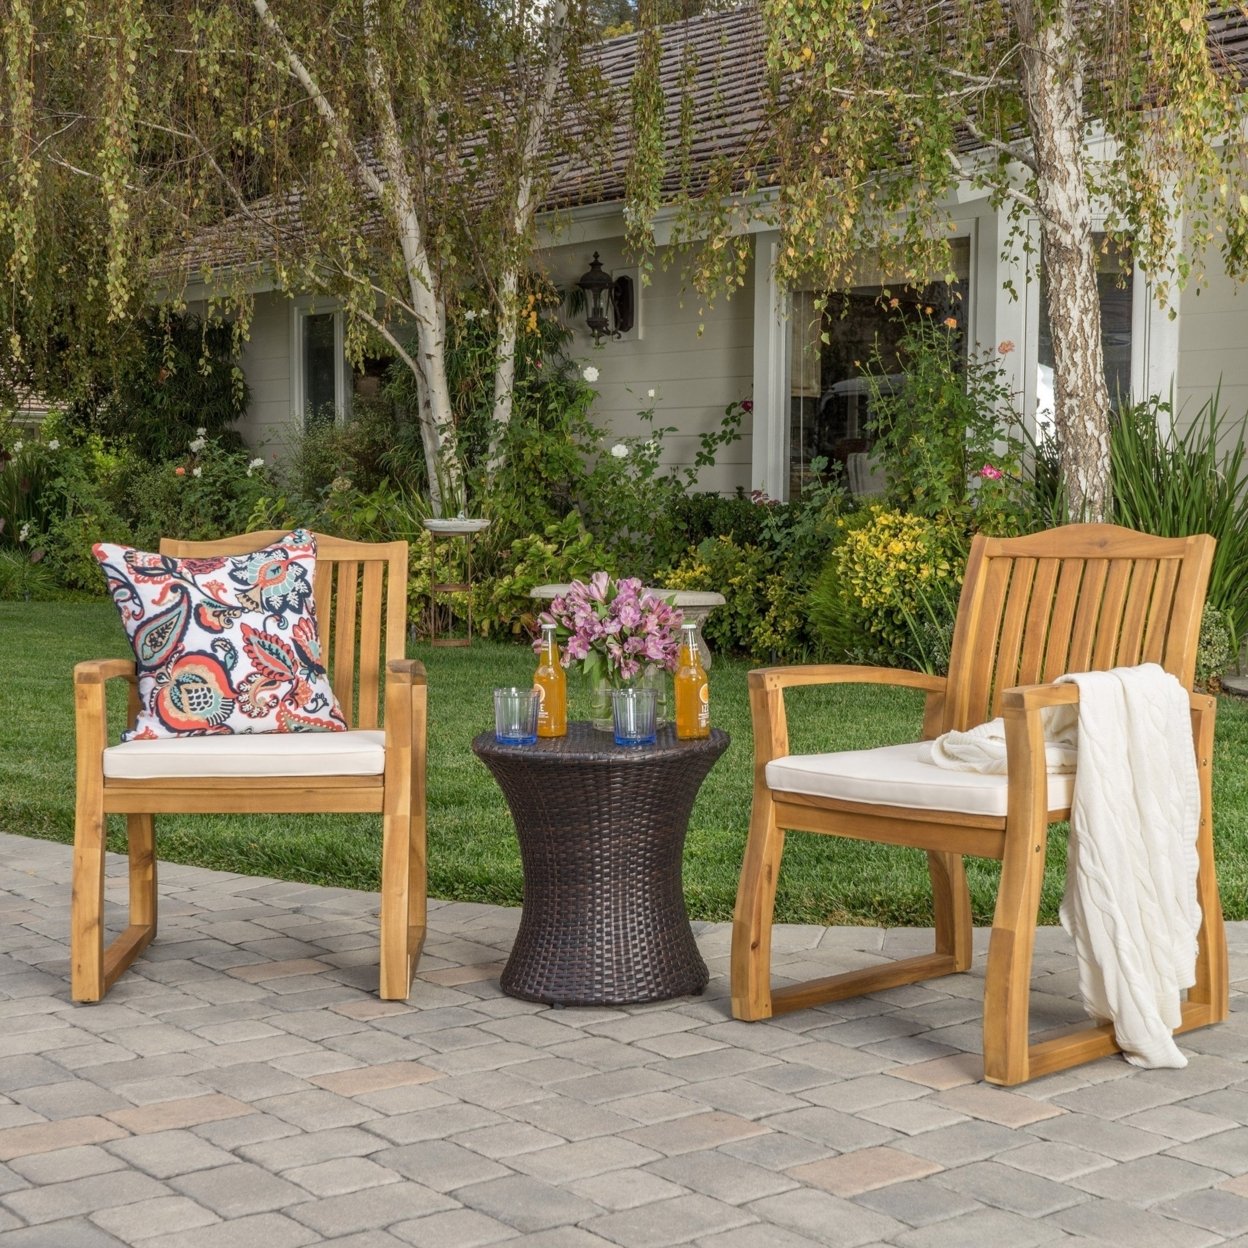 Malibu Outdoor Acacia Wood 3 Piece Chat Set With Wicker Table - Hourglass Table, Default